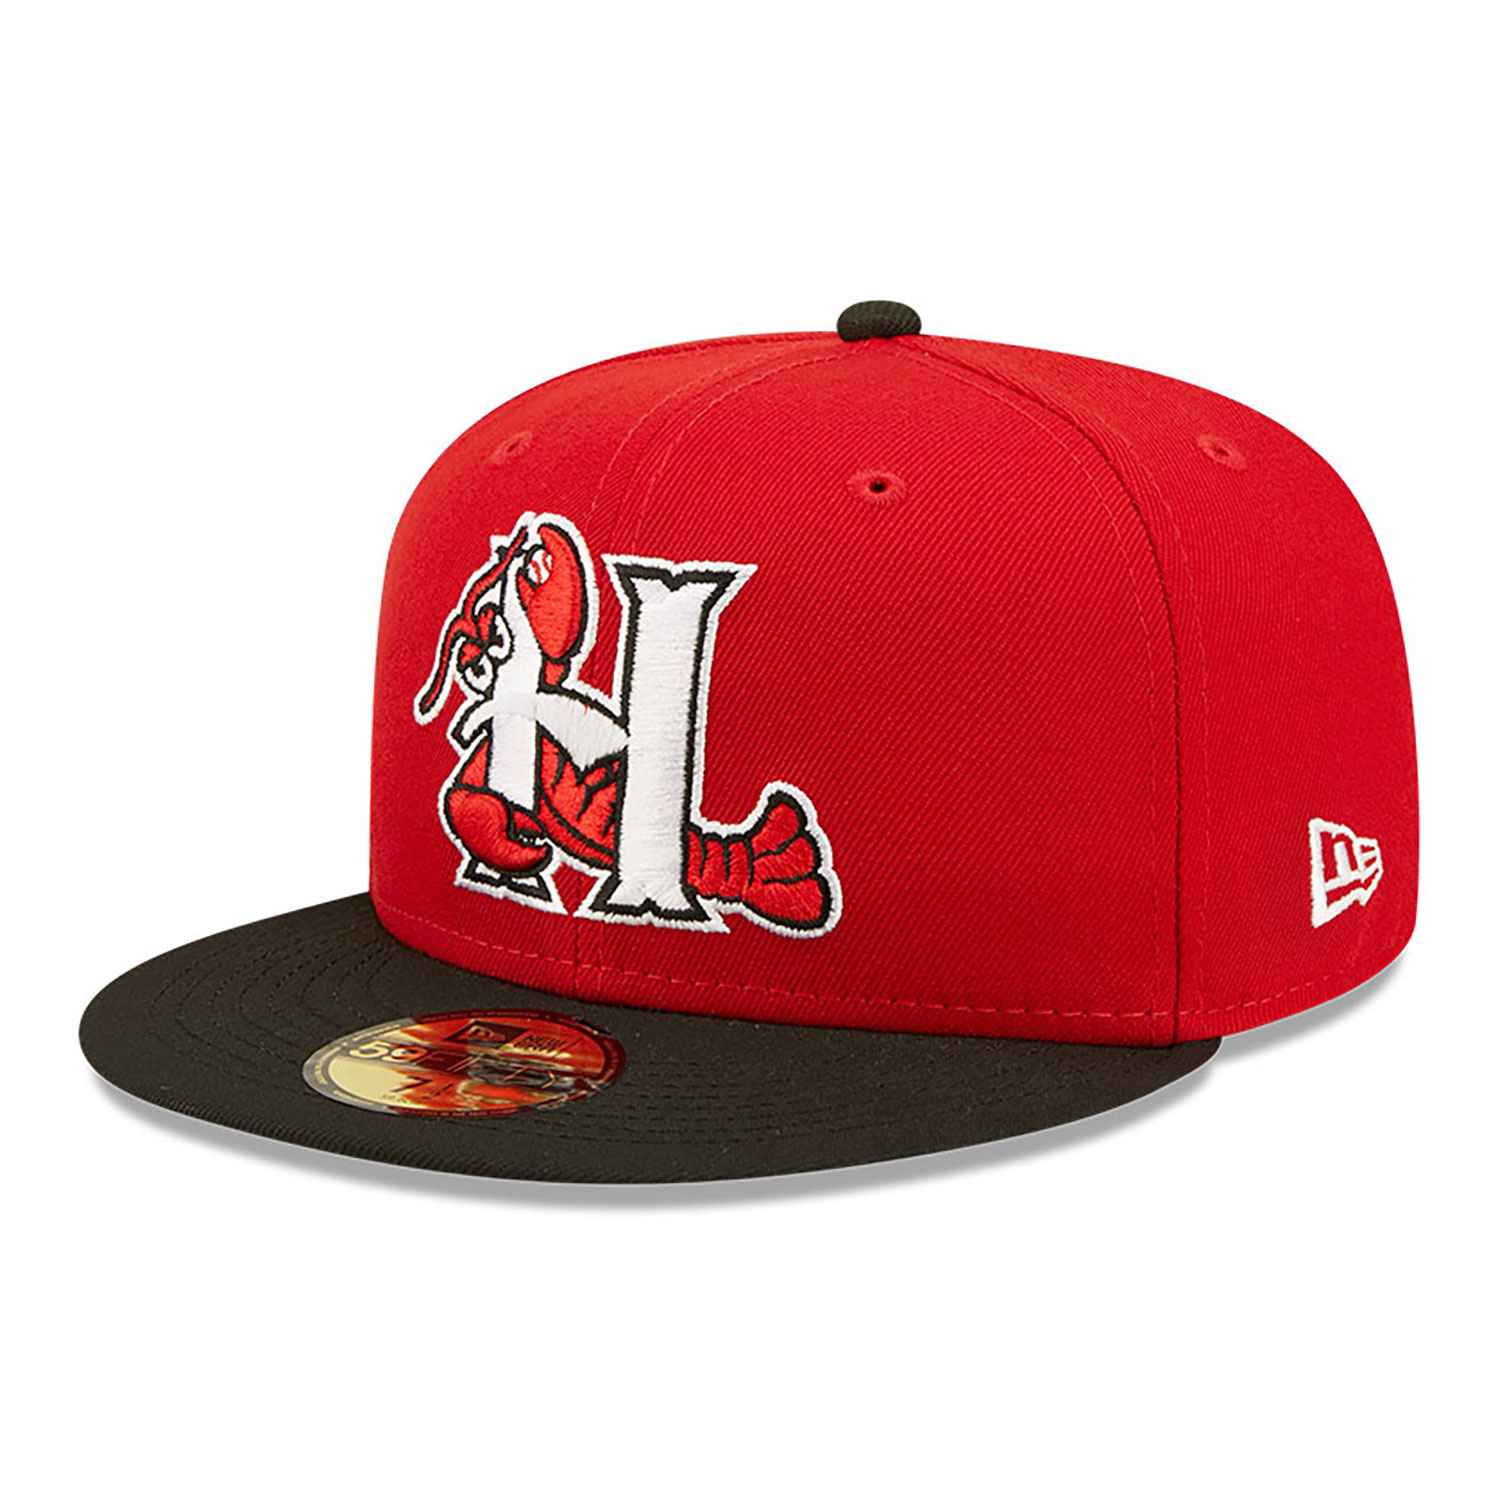 Official New Era MiLB Hickory Crawdads 59FIFTY Fitted Cap C2_338 | New ...